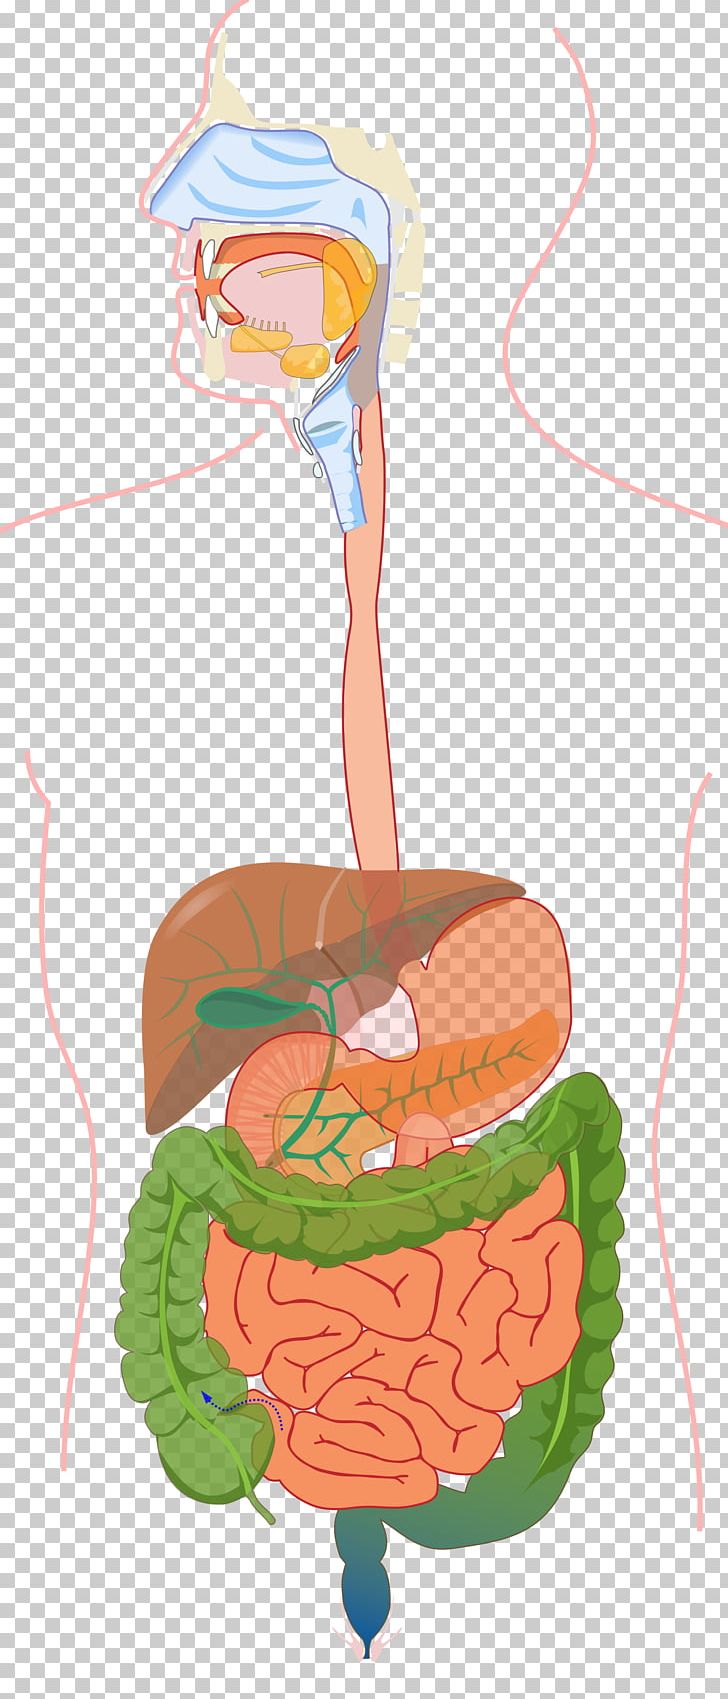 Gastrointestinal Tract Human Digestive System Digestion Endocrine System Organ System PNG, Clipart, Anatomy, Art, Chart, Diagram, Digestion Free PNG Download